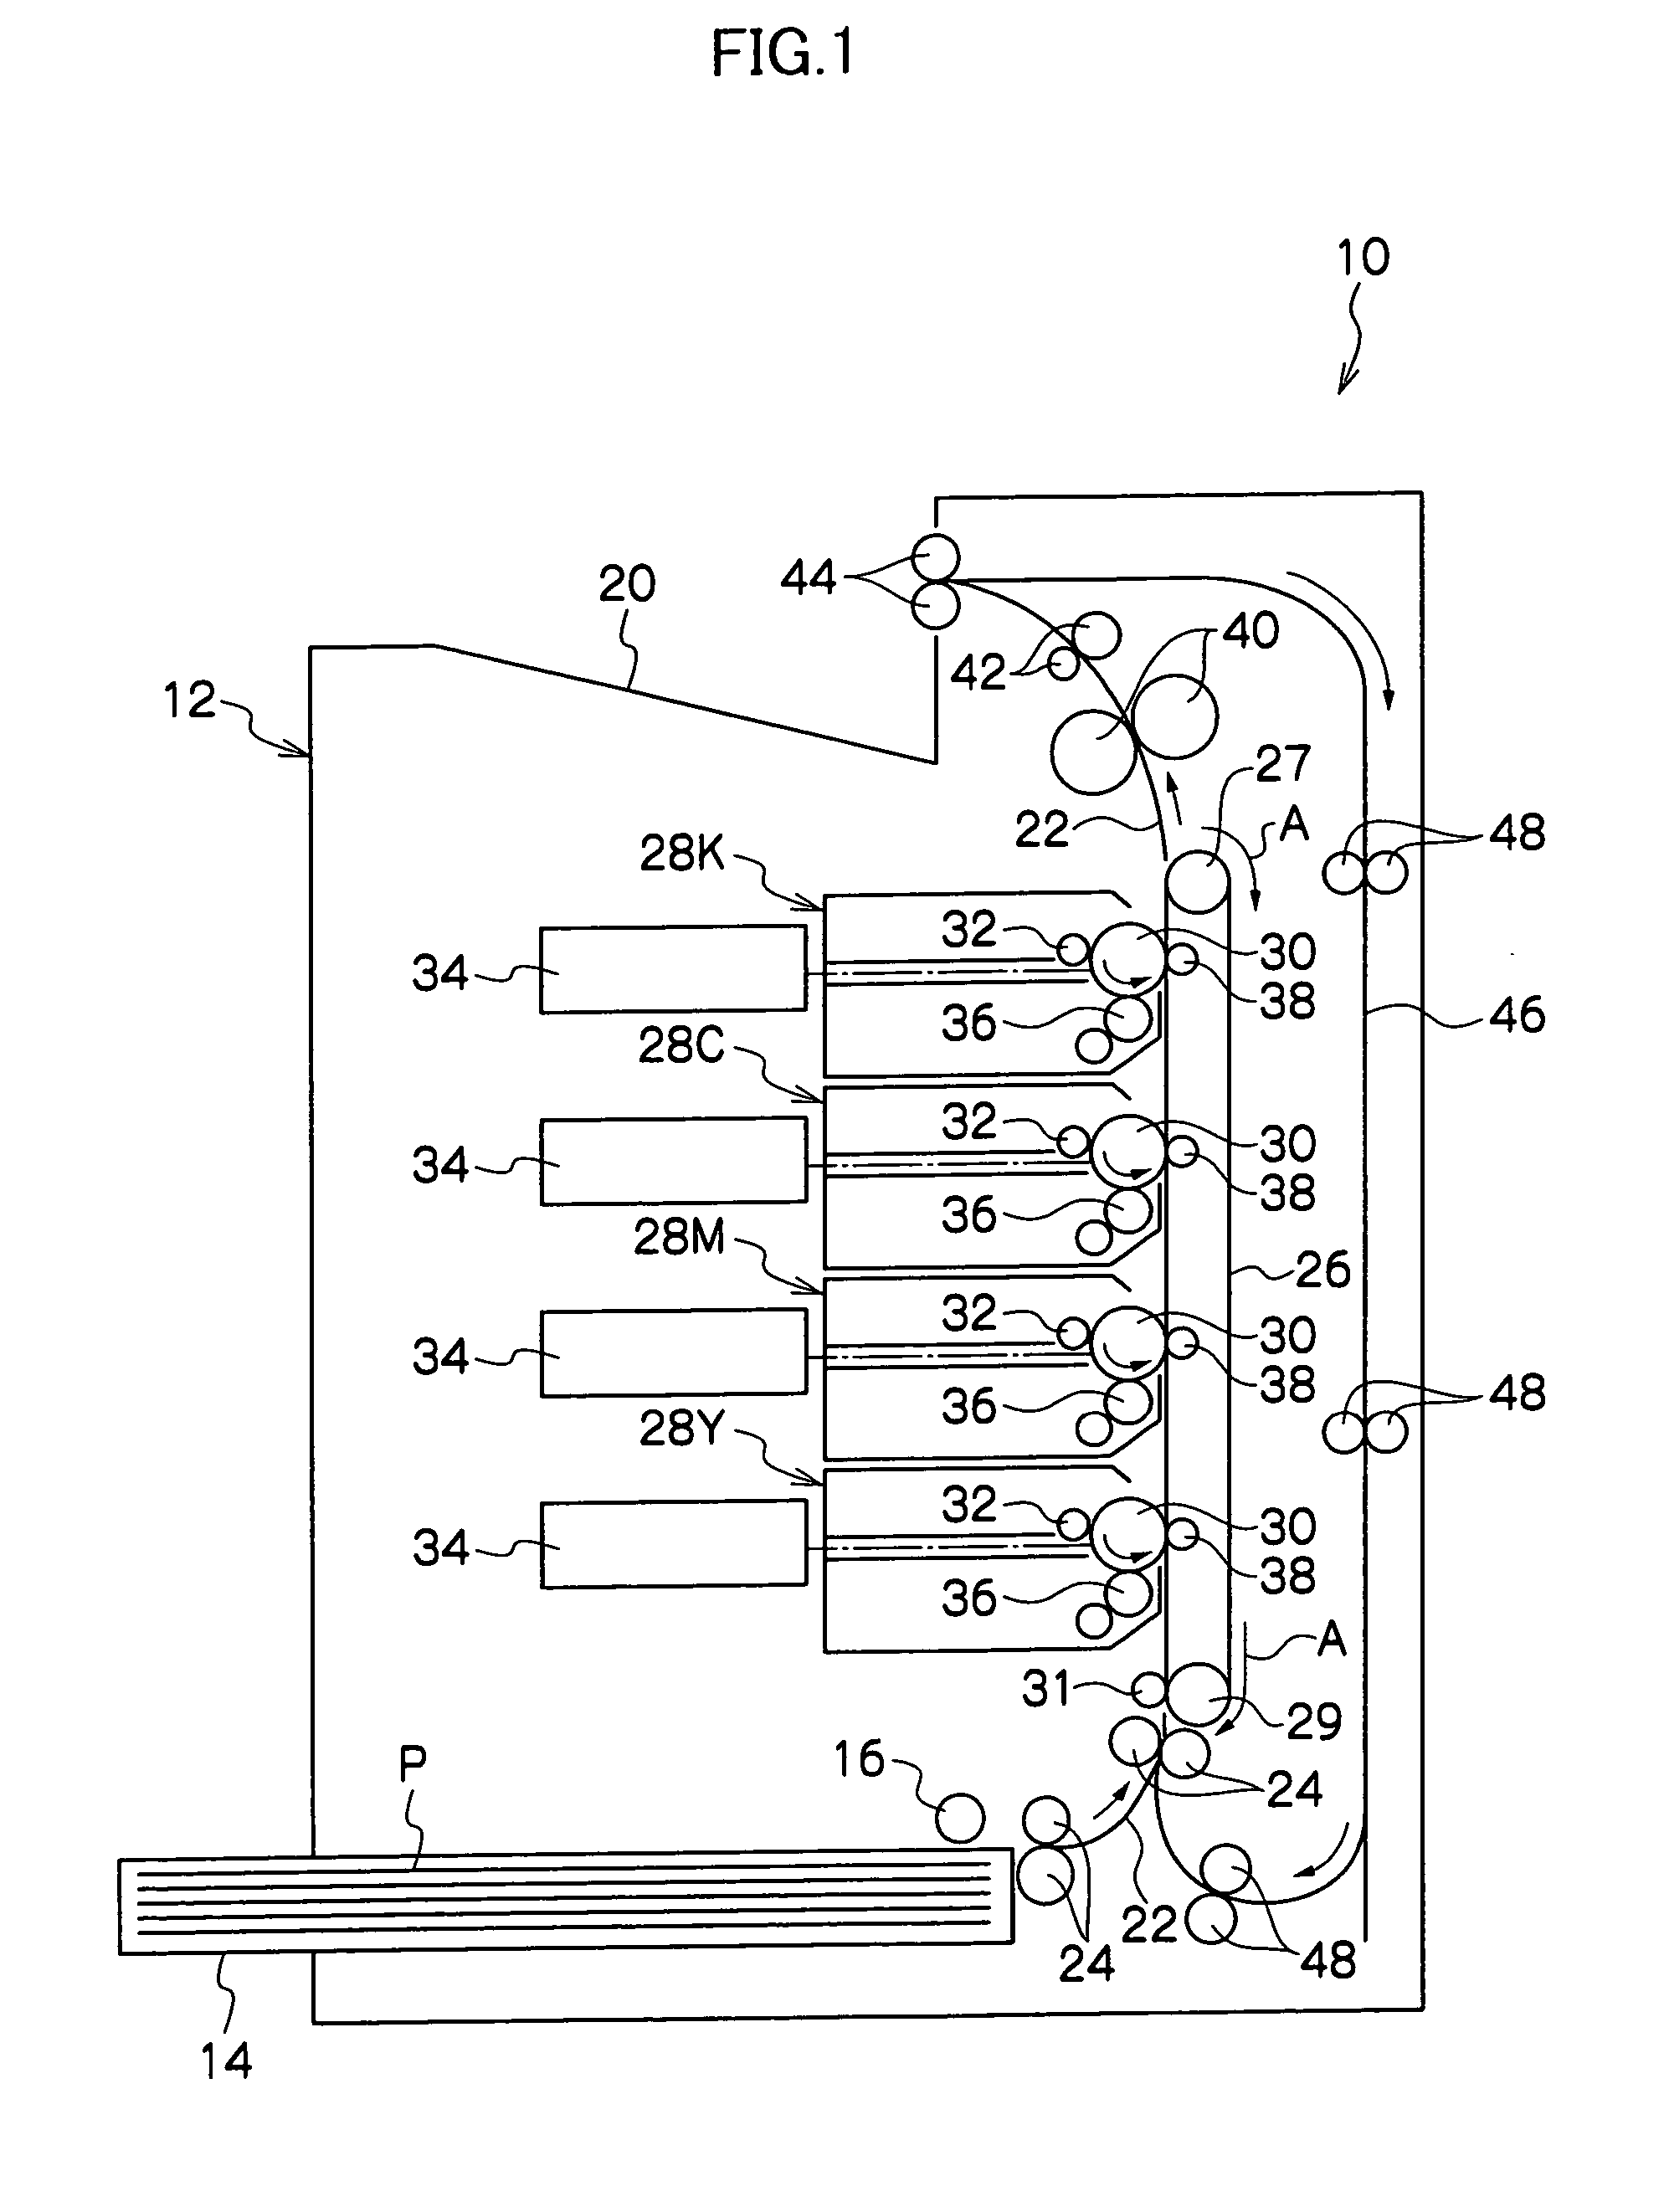 Image formation device with belt mounted pivoting cover